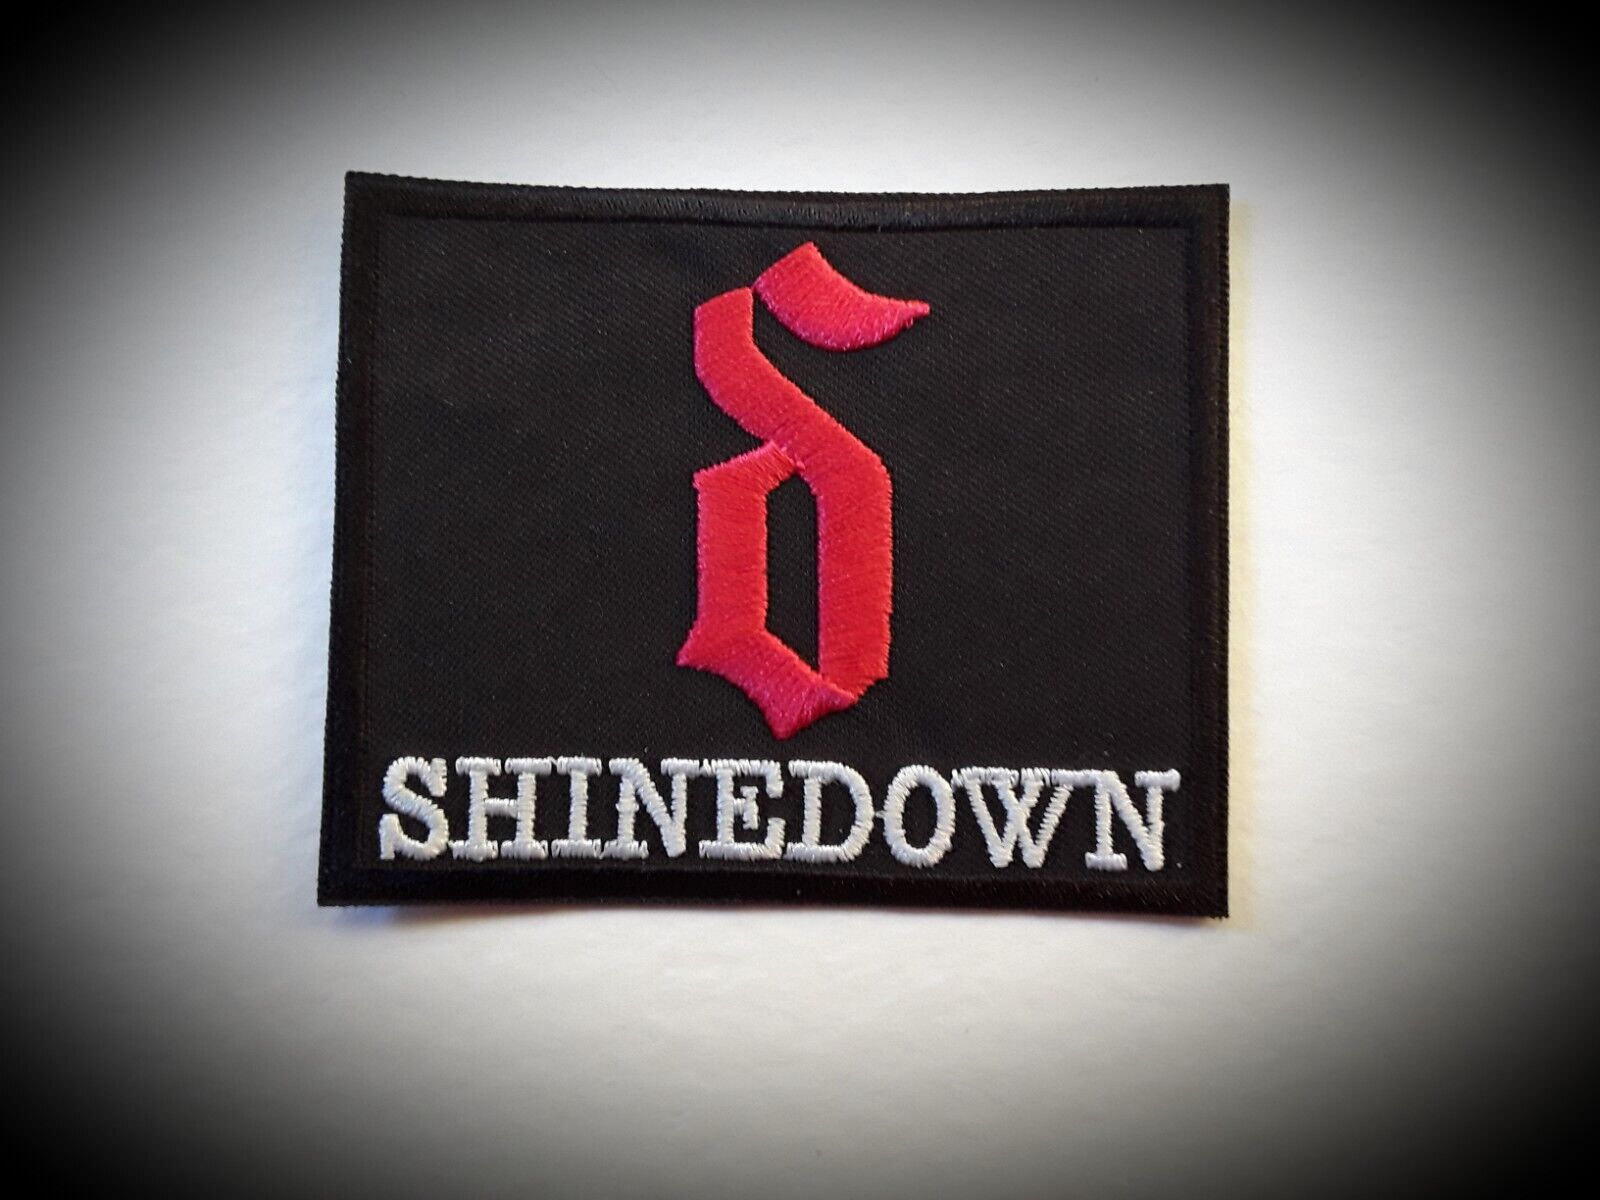 SHINEDOWN IRON OR SEW ON QUALITY EMBROIDERED PATCH UK SELLER